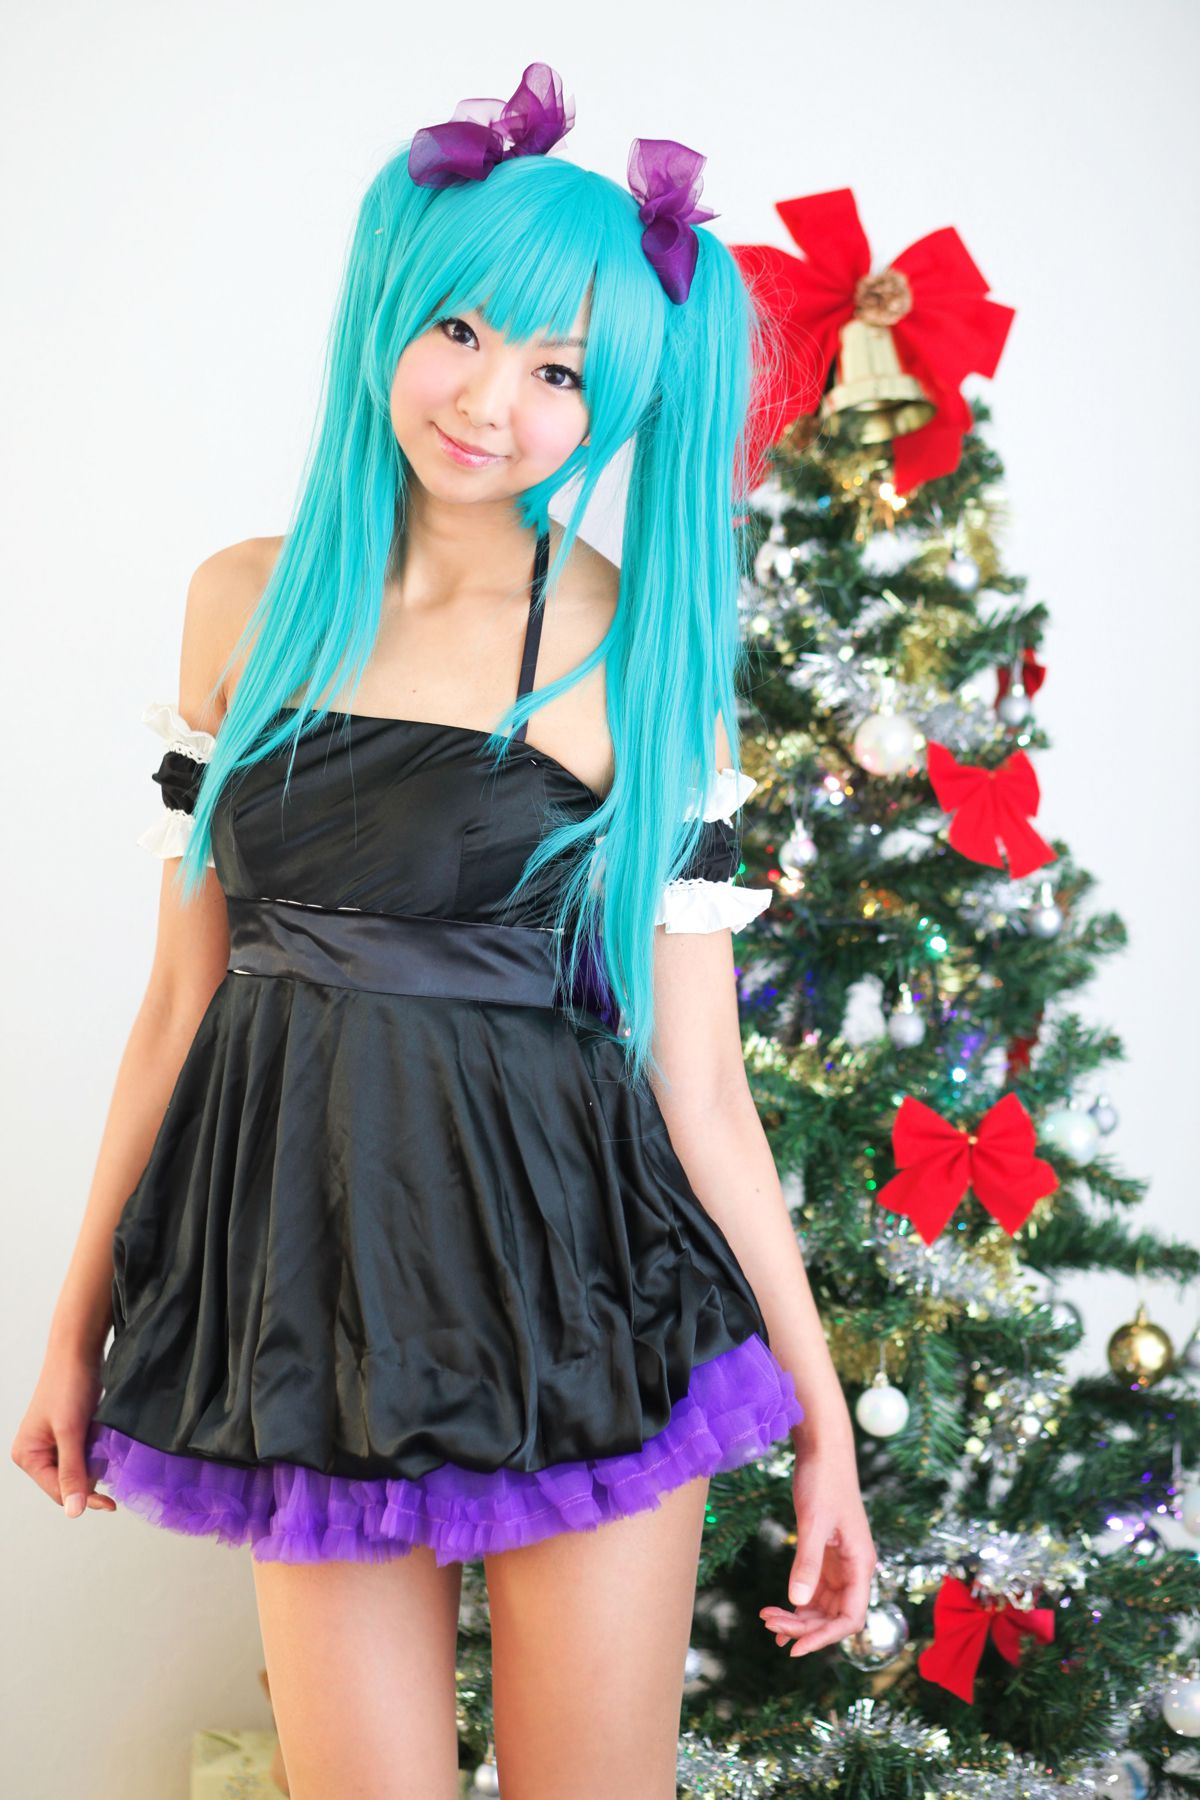 taotuhome[Cosplay] Necoco as Hatsune Miku from Vocaloid 套图第169张